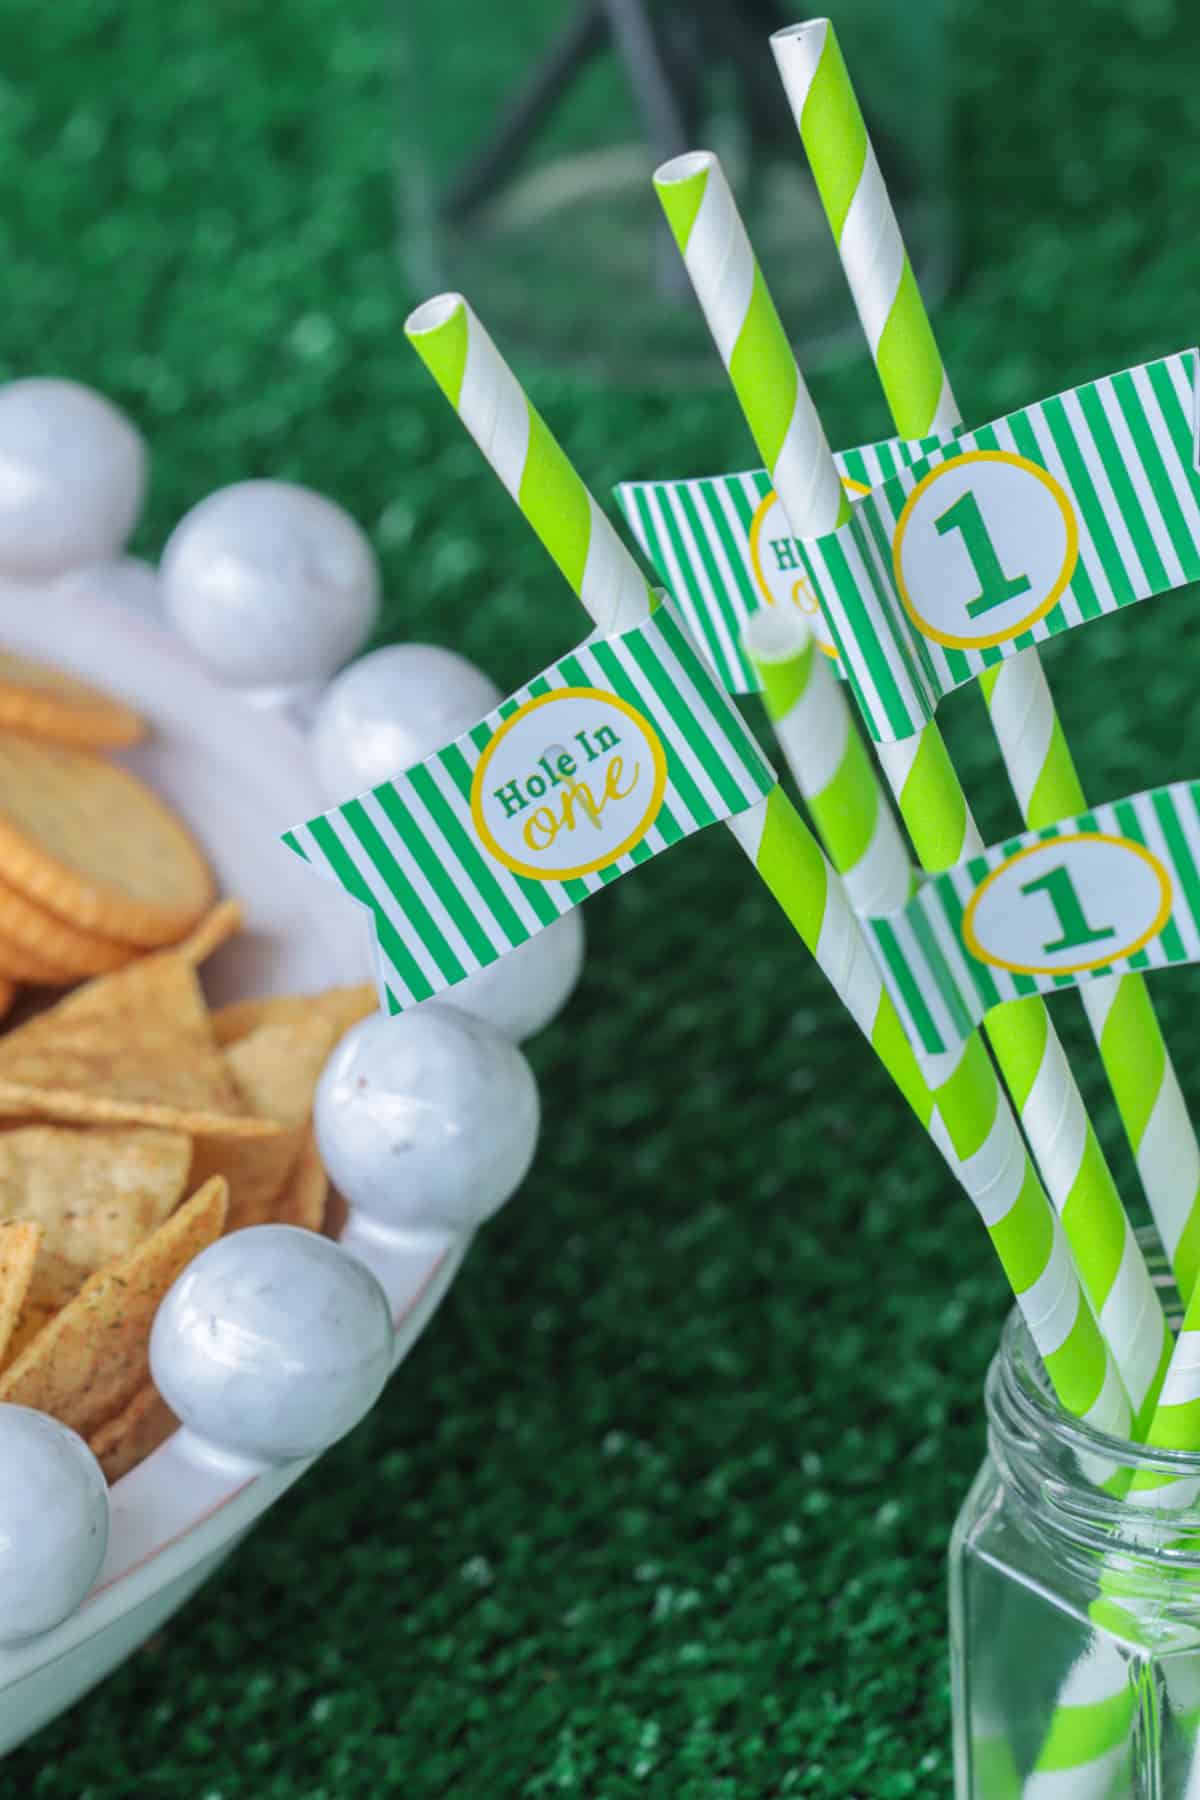 Straws with hole in one flags.